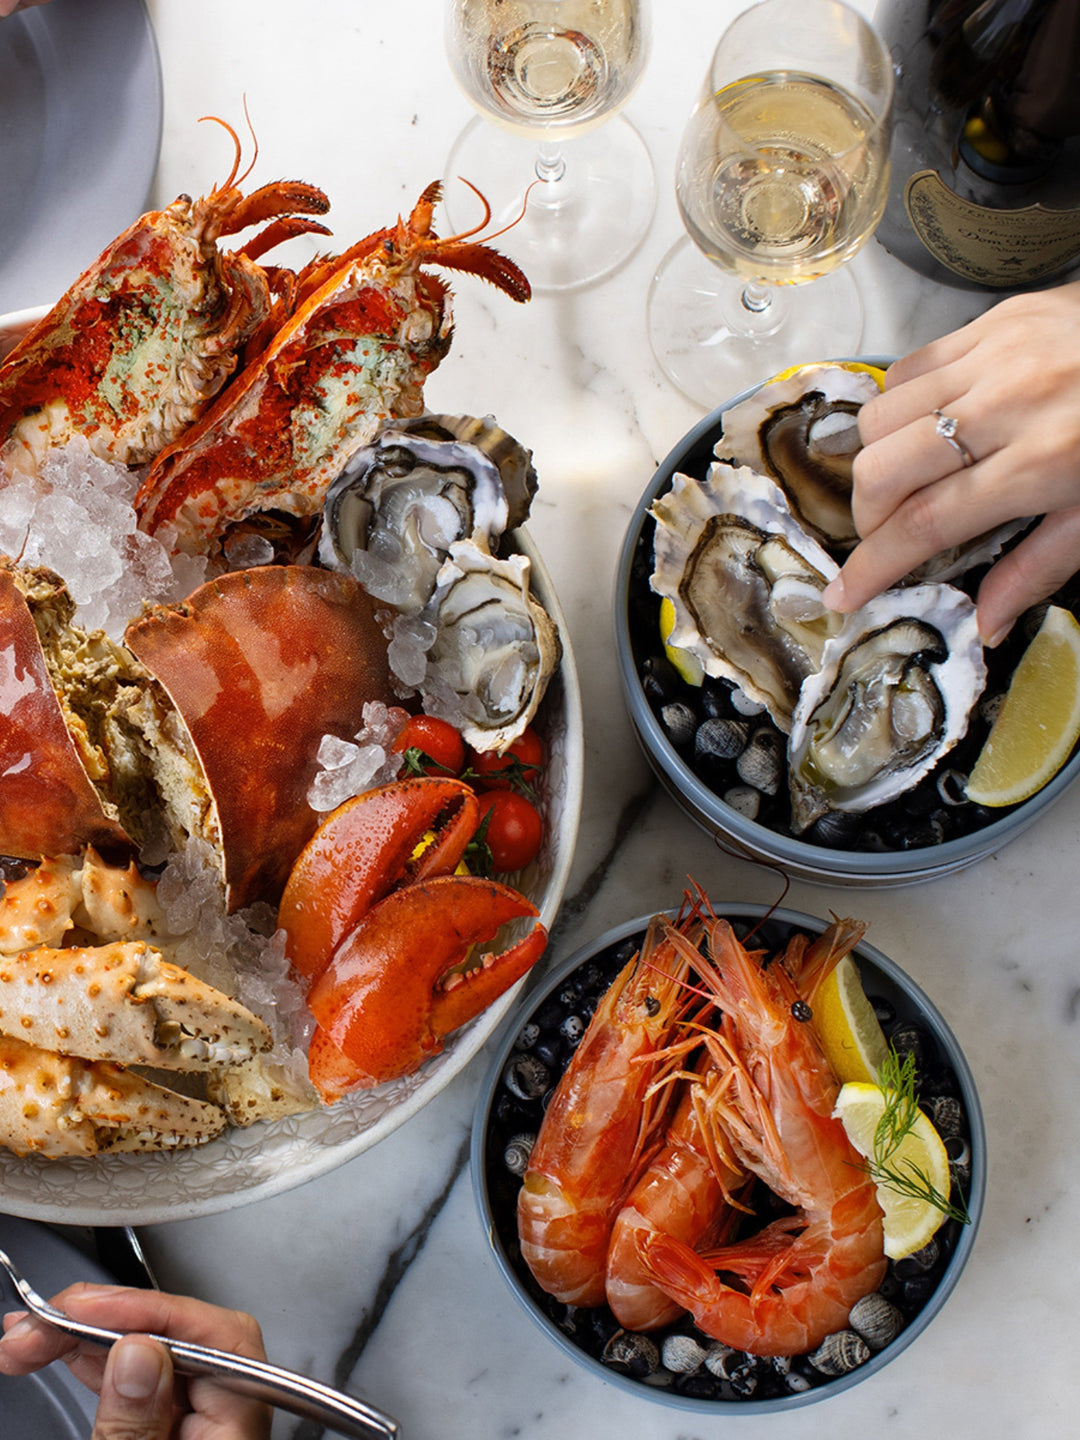 Labour Day 5.1 Offer - PORTERHOUSE SPECTACULAR SEAFOOD BUFFET (49% off)